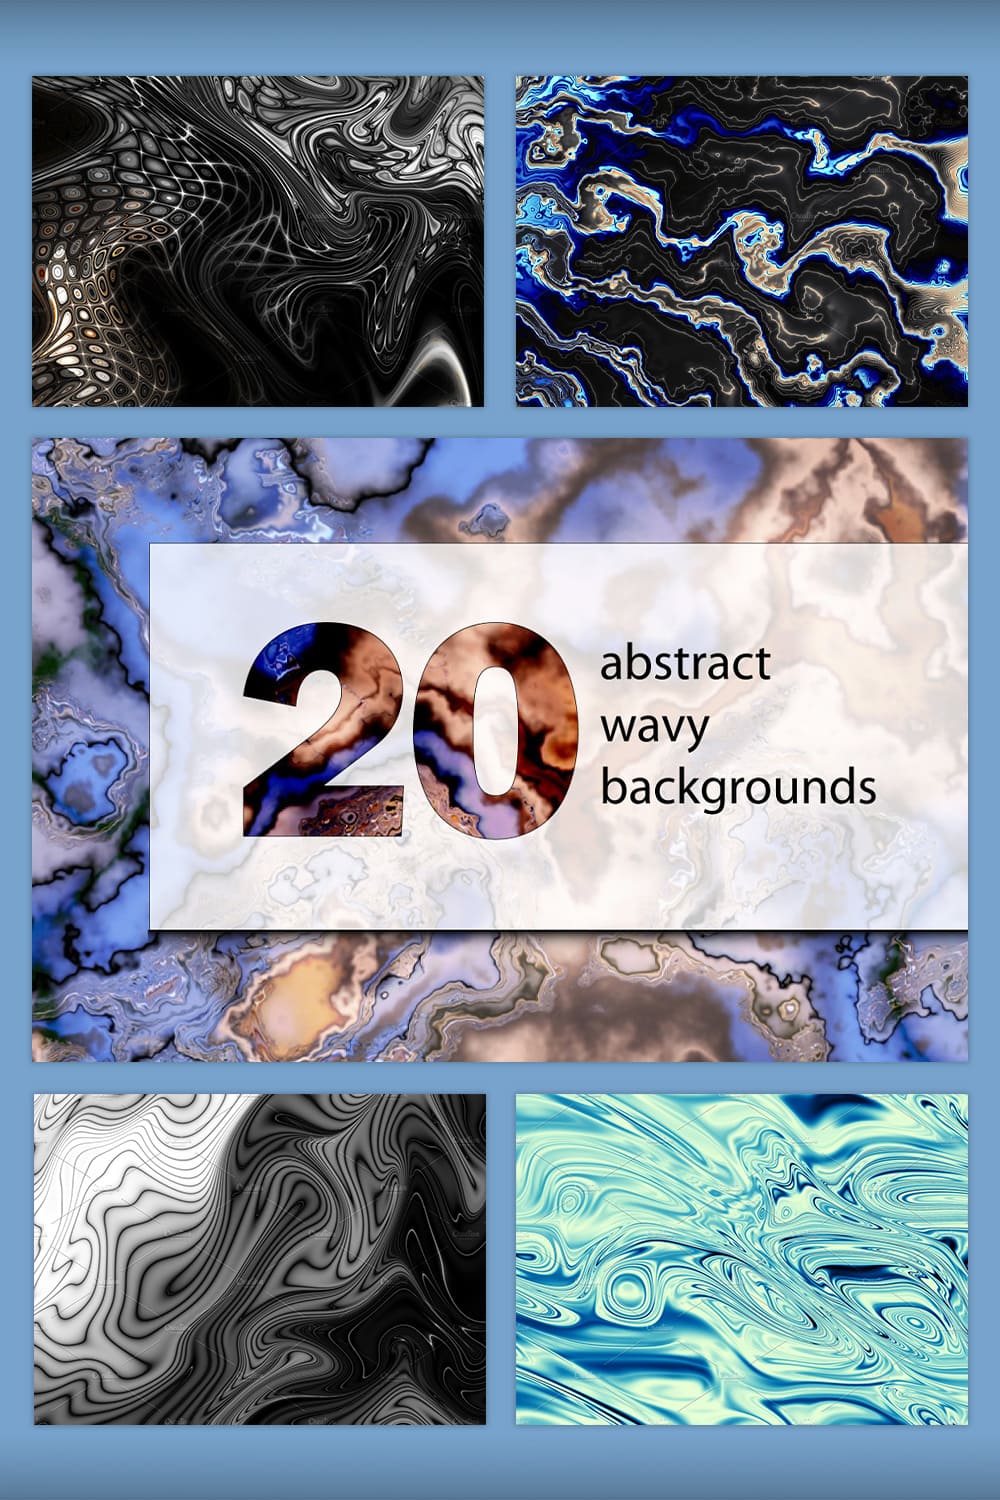 20 Abstract Wavy Backgrounds pinterest image.